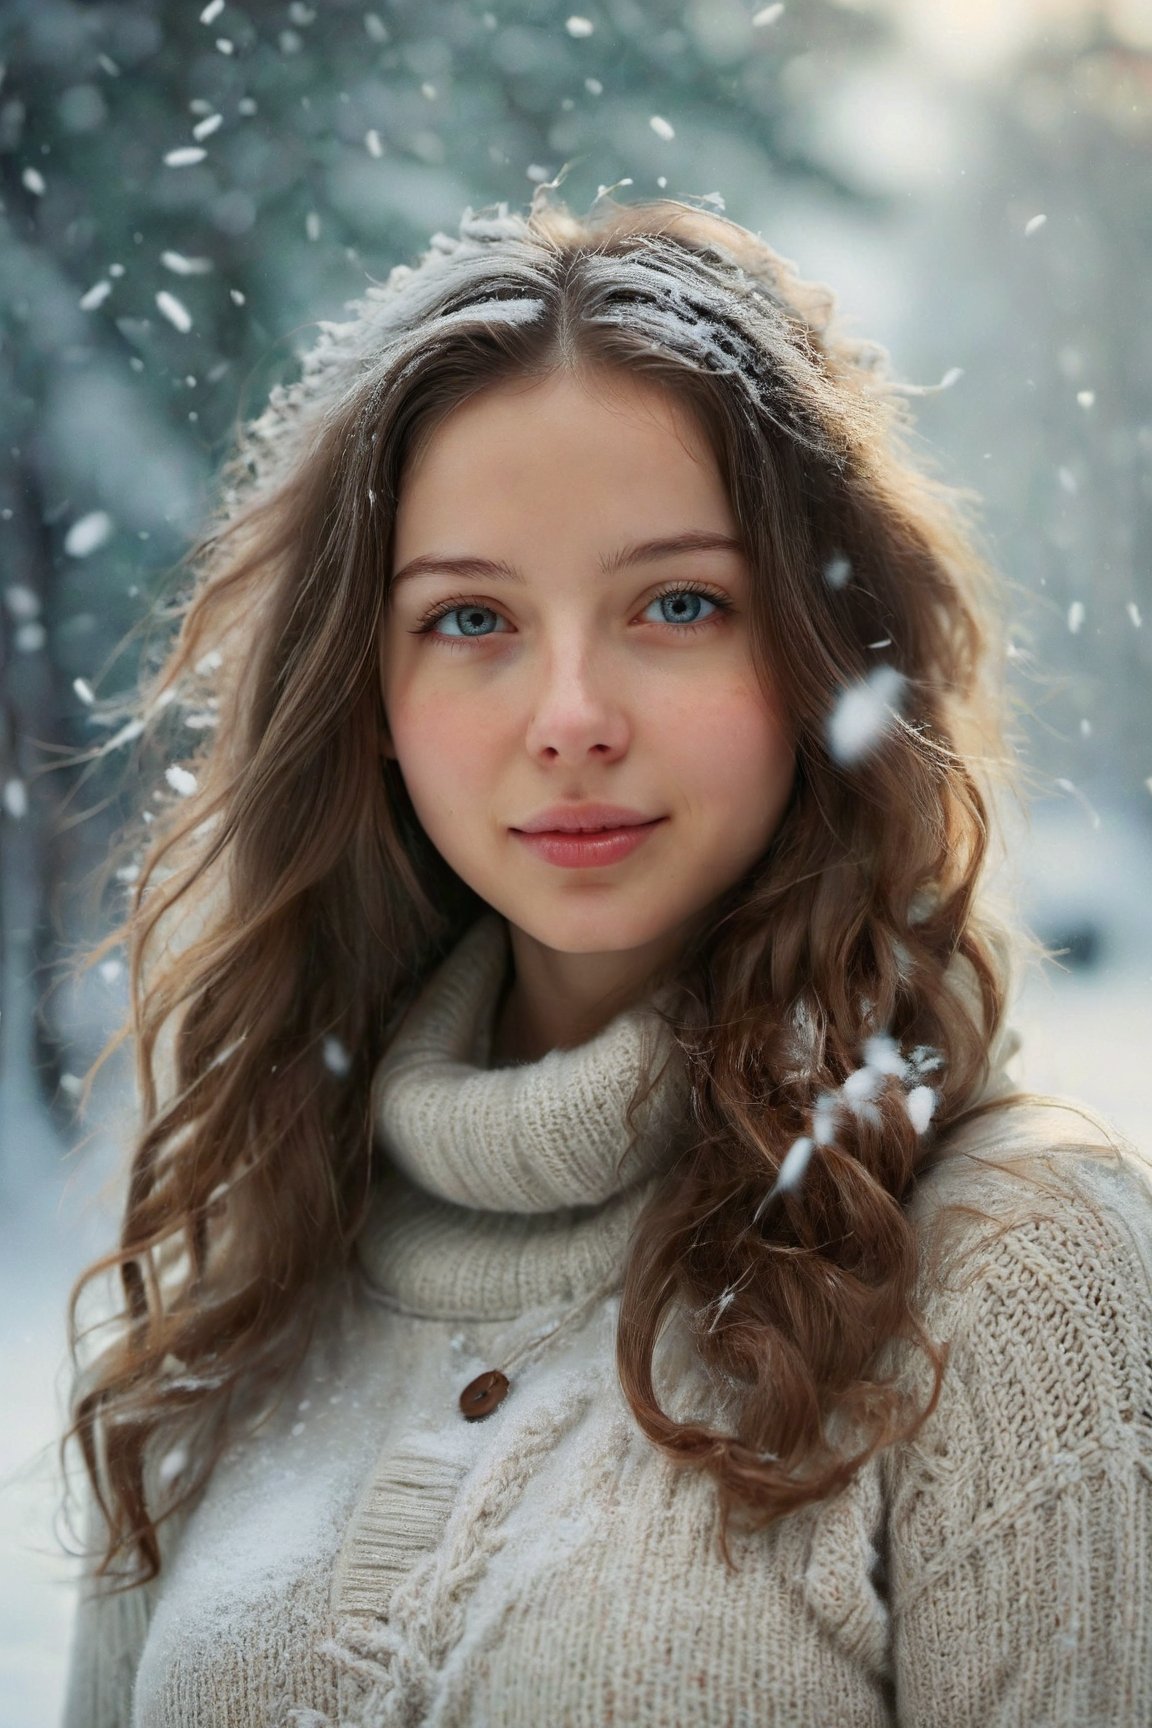 beautiful detailed eyes, beautiful detailed lips, extremely detailed eyes and face, long eyelashes, long flowing hair, a sweet smile, a girl with a sporty look, wearing a cozy sweater, immersed in a snowing background, surrounded by gently falling snowflakes, creating a serene and magical atmosphere, capturing the peacefulness and tranquility of a winter's day. The snow-covered landscape and the soft glow of the winter light enhance the girl's presence, making her stand out as the focal point of the painting. The intricate details in her eyes and lips bring out her inner beauty and depth, captivating the viewer's attention. The long hair flows elegantly, adding movement and grace to the composition. The cozy sweater adds a touch of warmth to the scene, contrasting with the cool tones of the snowy background. The combination of the girl's expression and the snowy setting evokes a sense of wonder and joy, inviting the viewer to experience the magic of the winter season,Cinematic 